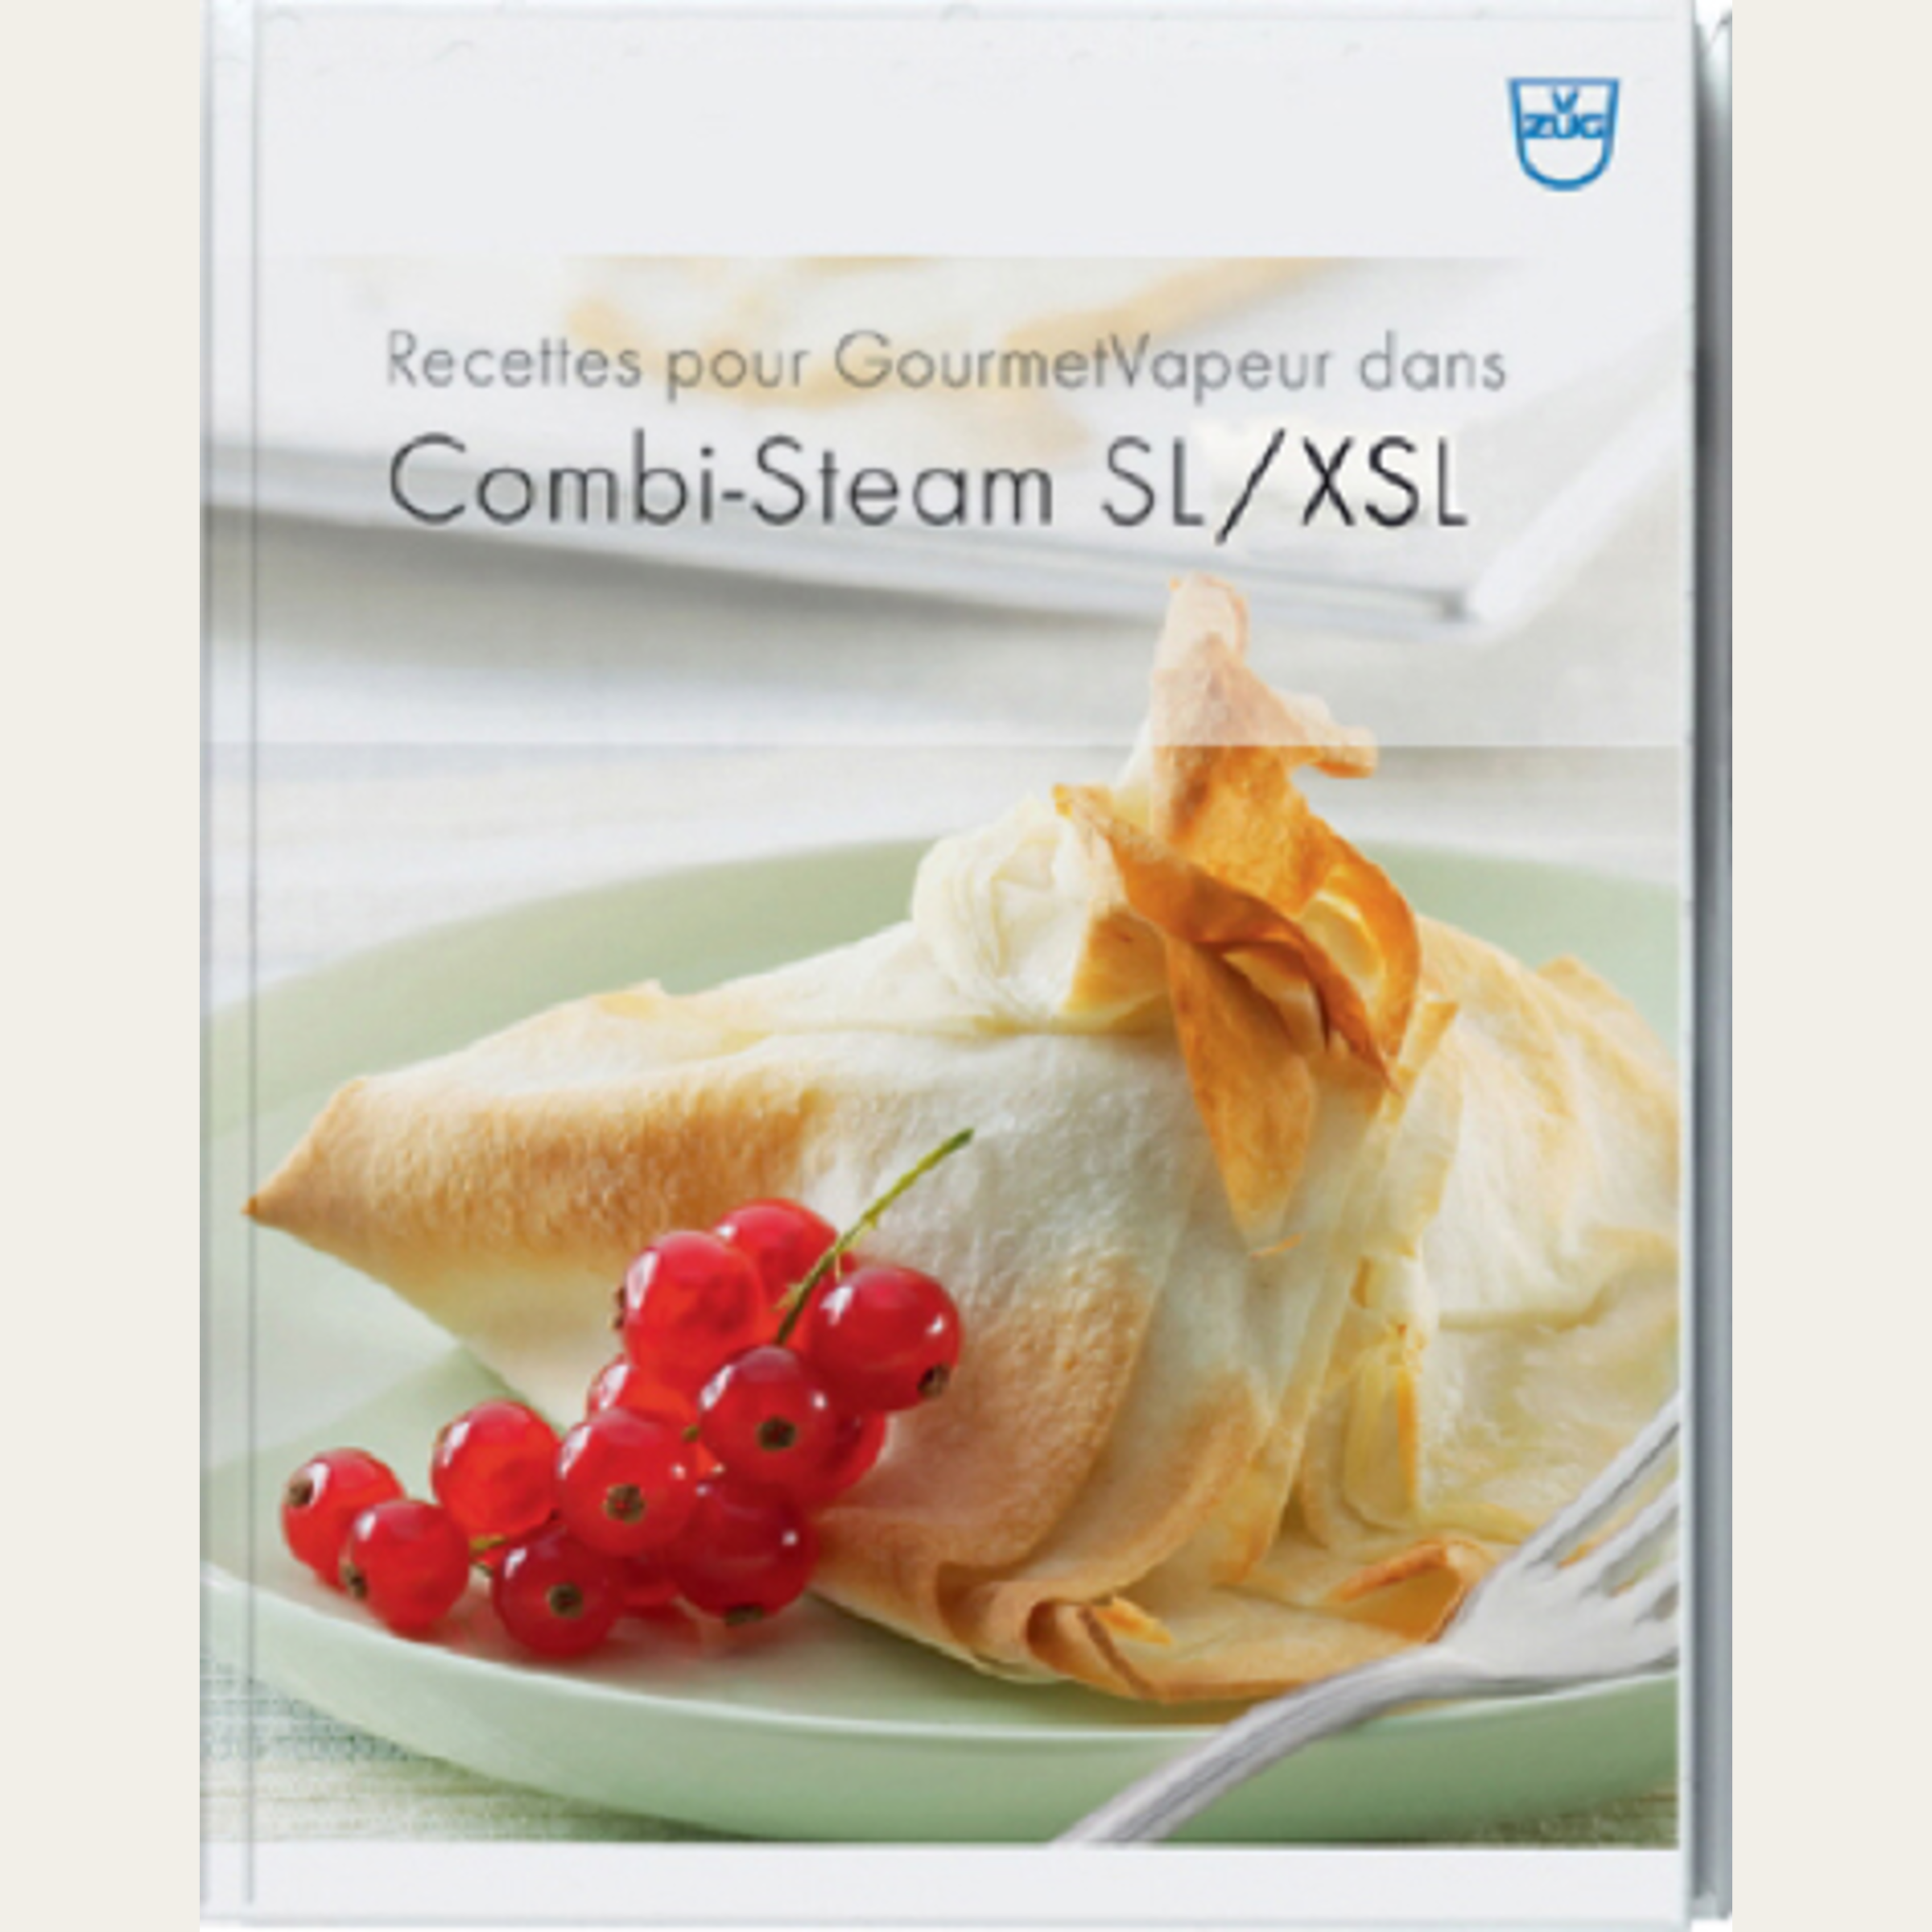 Recipe book for GourmetSteam for Combi-Steam SL/XSL in French